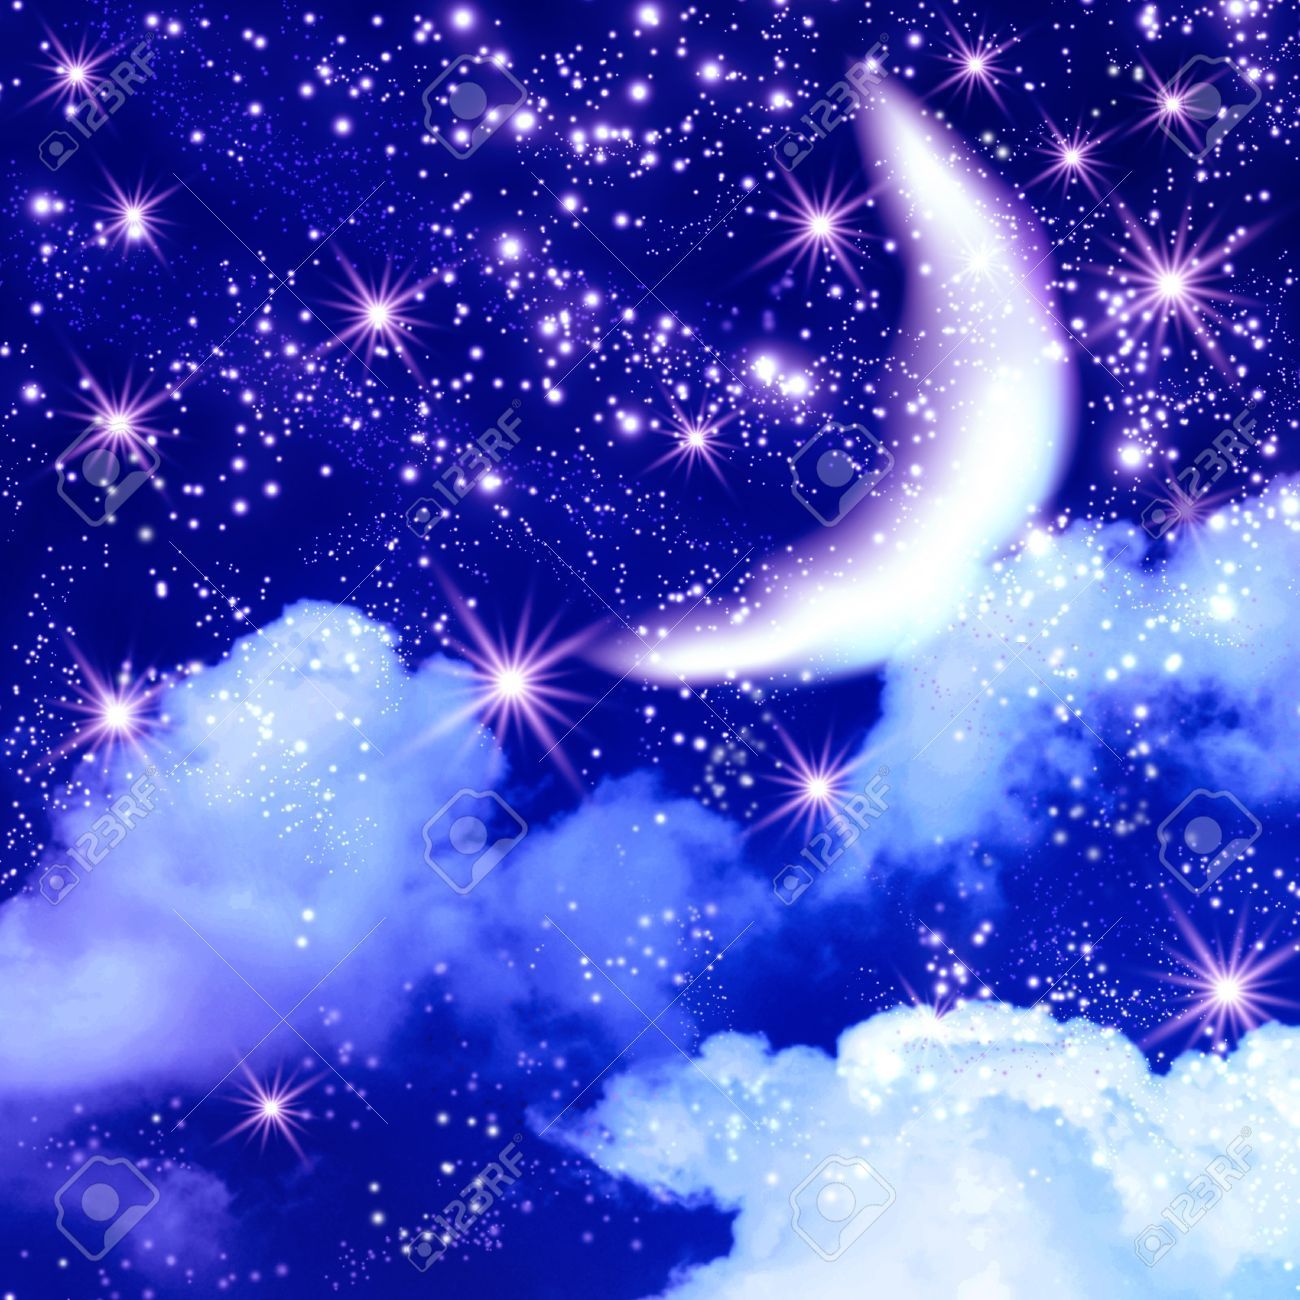 Sparkling Star Image & Stock Picture. Royalty Free Sparkling. Stars and moon, Night skies, Background for photography